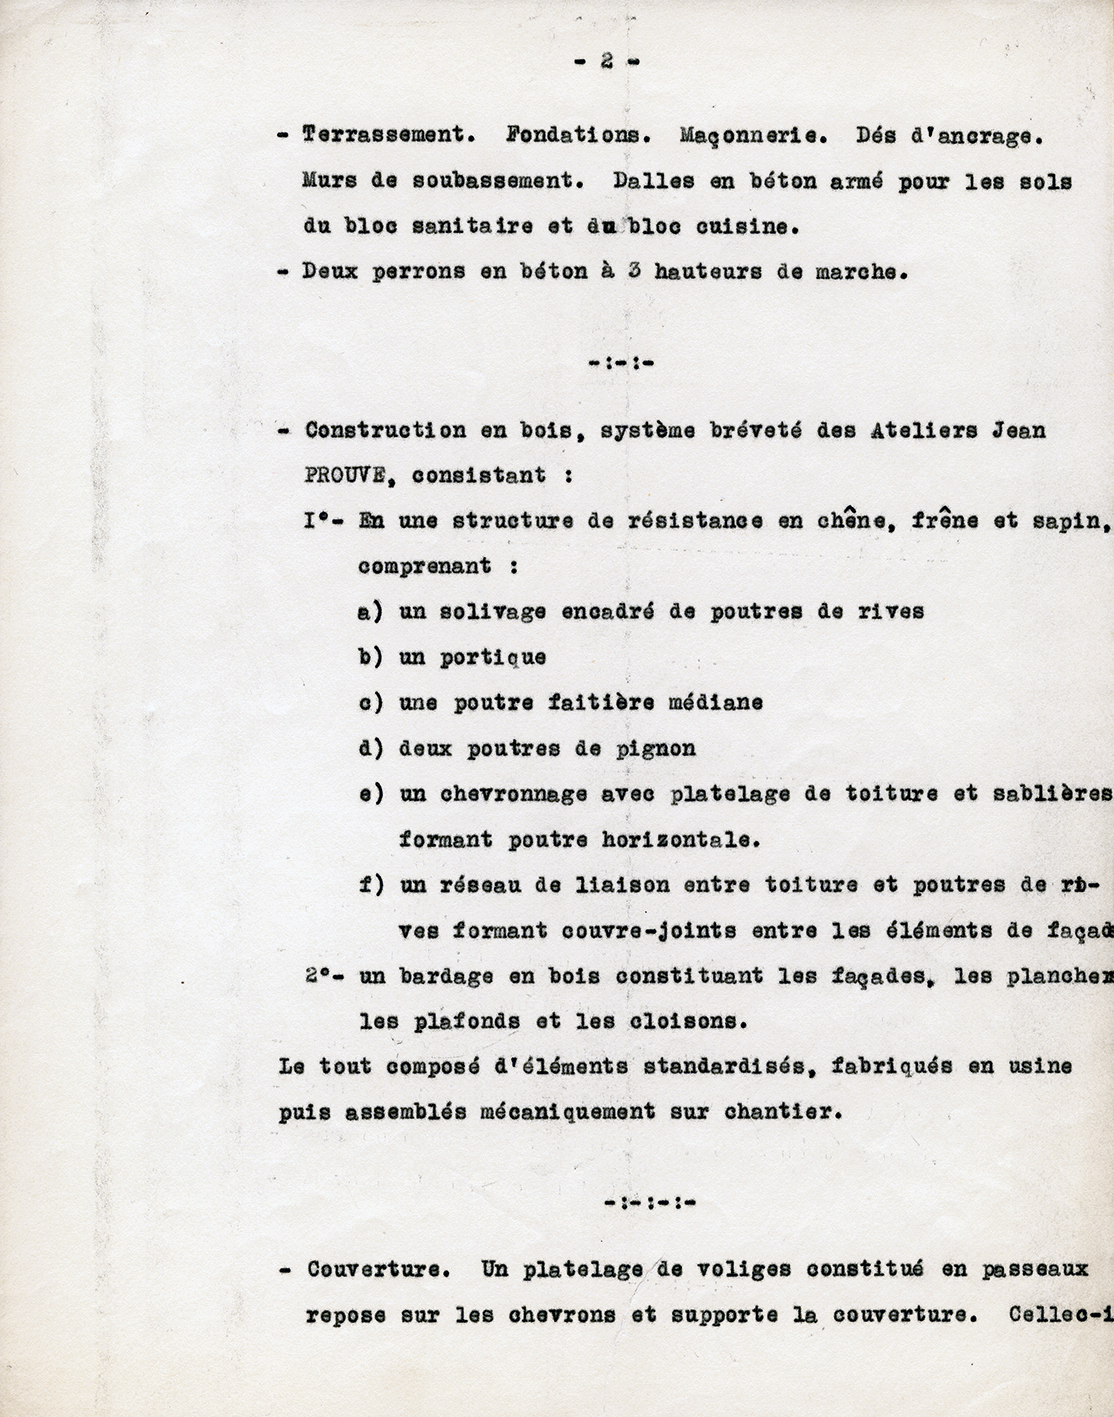 “Bureau Central de Constructions: the fully equipped BCC family house”. Technical specifications, 11 March 1942.